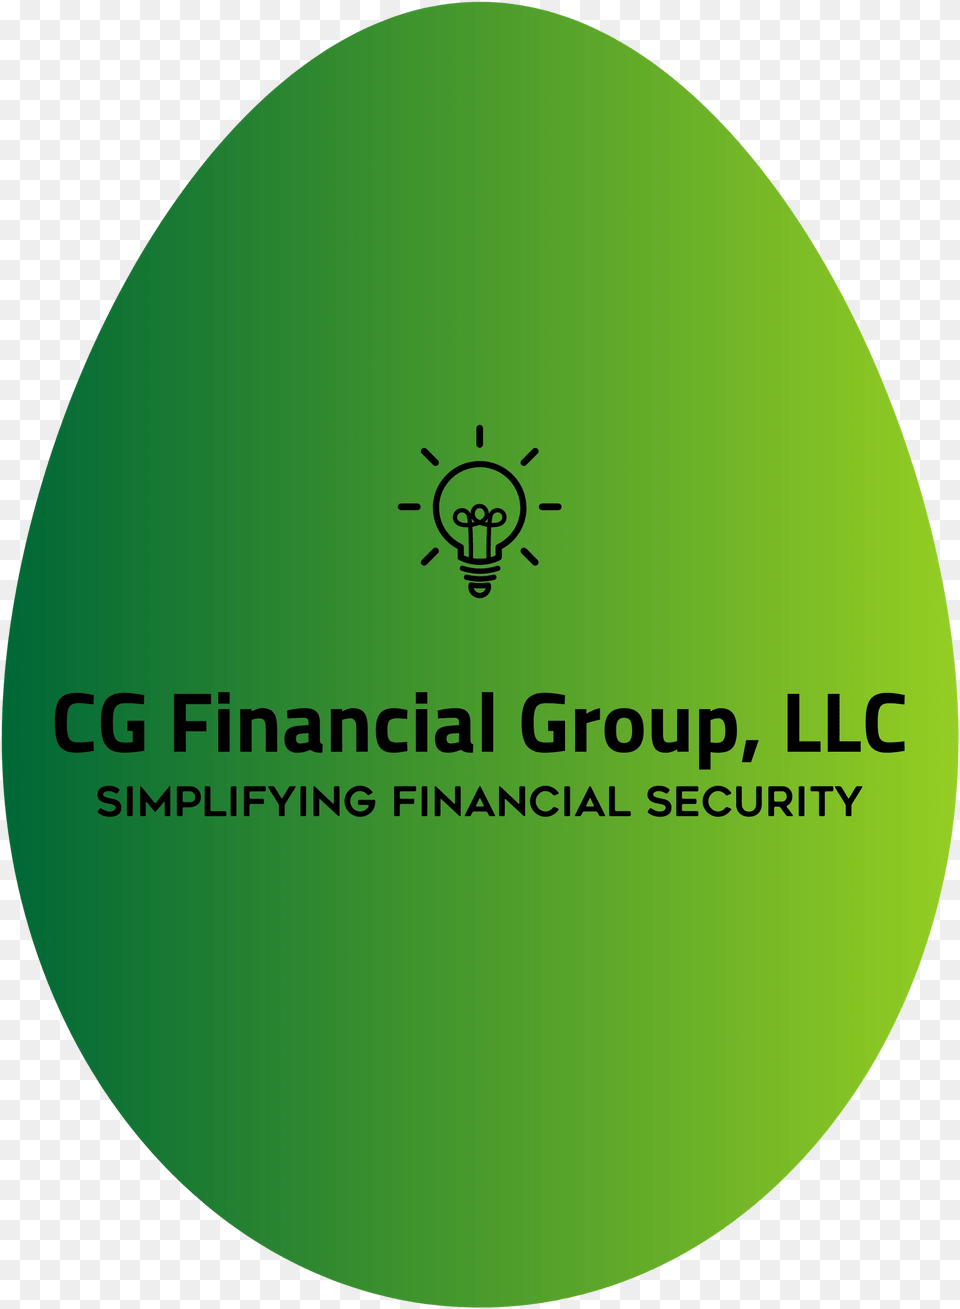 About The Green Egg Logo Cg Financial Group Llc Circle, Food, Disk Png Image